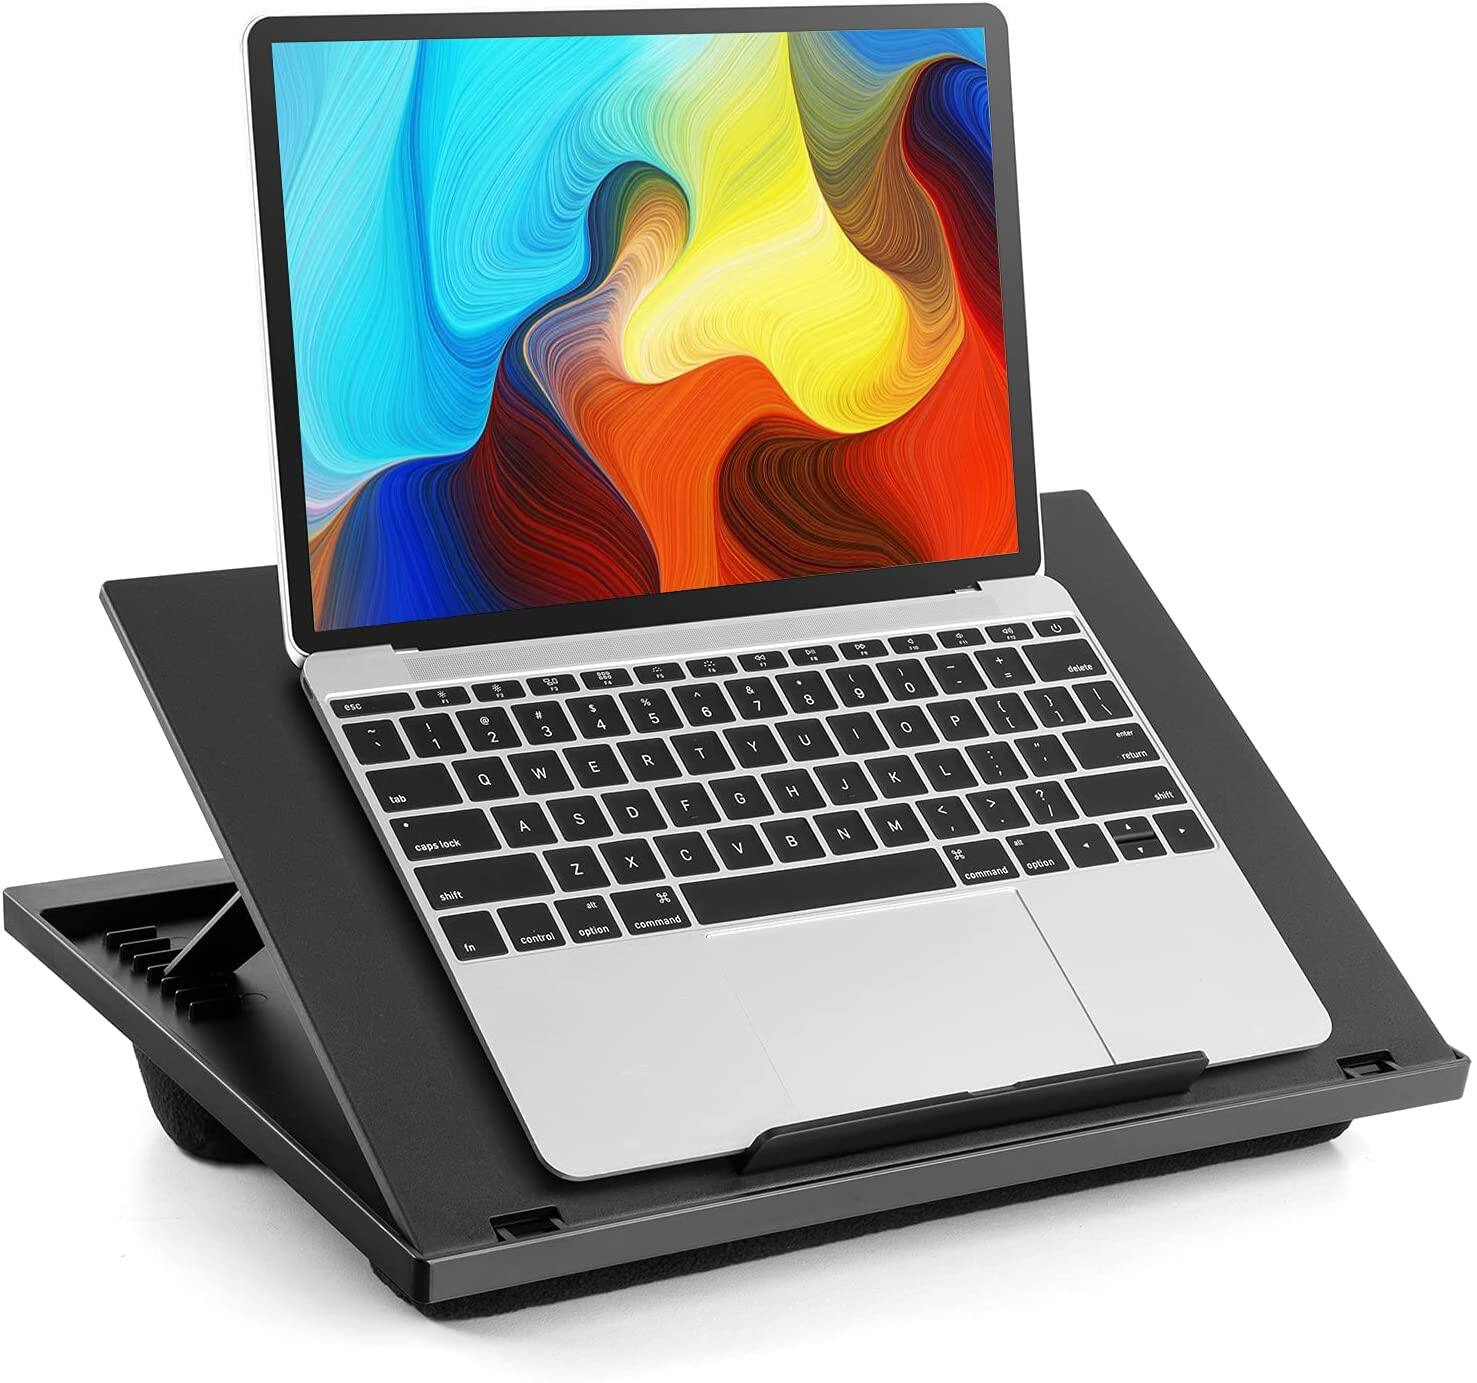 Loryergo Adjustable Laptop Stand with 8 Angles and Dual Cushions for $13.19 + Free Shipping w/ Prime